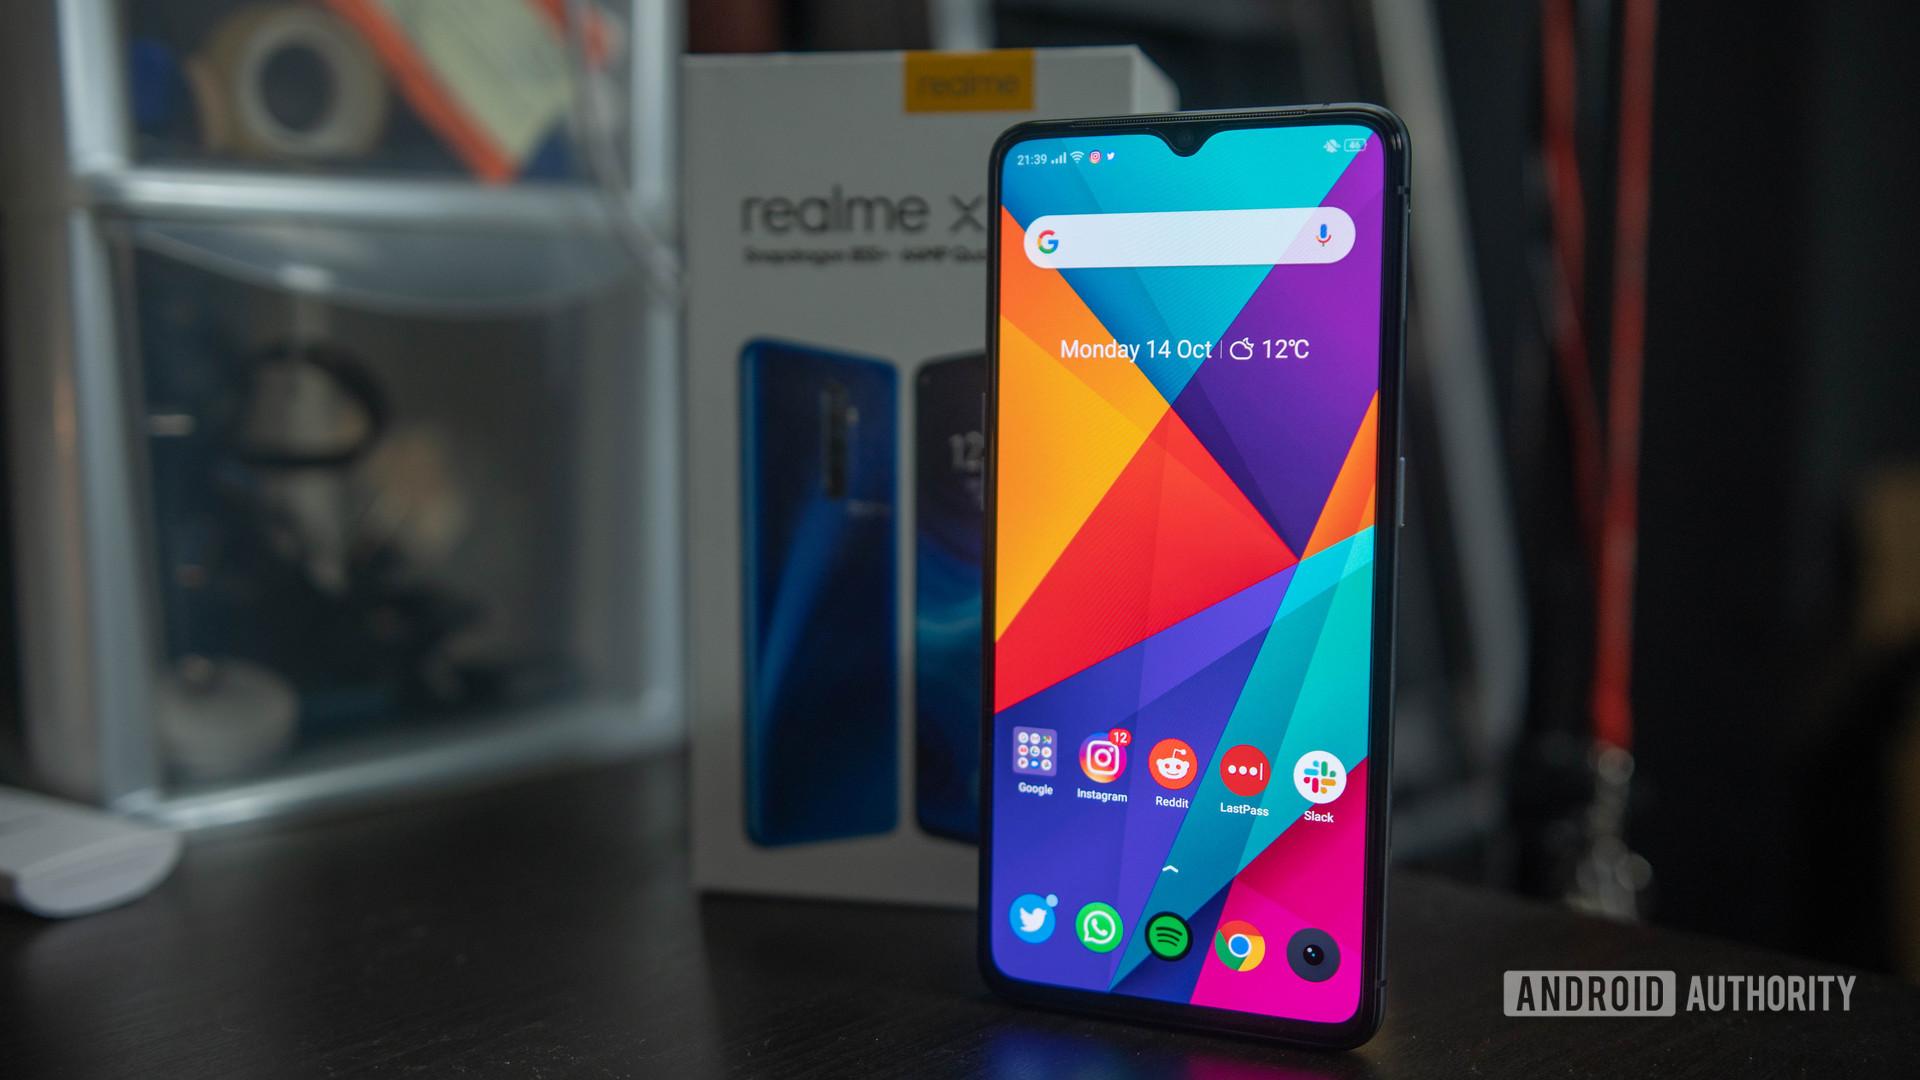 Realme X2 Pro screen on in front of box wide